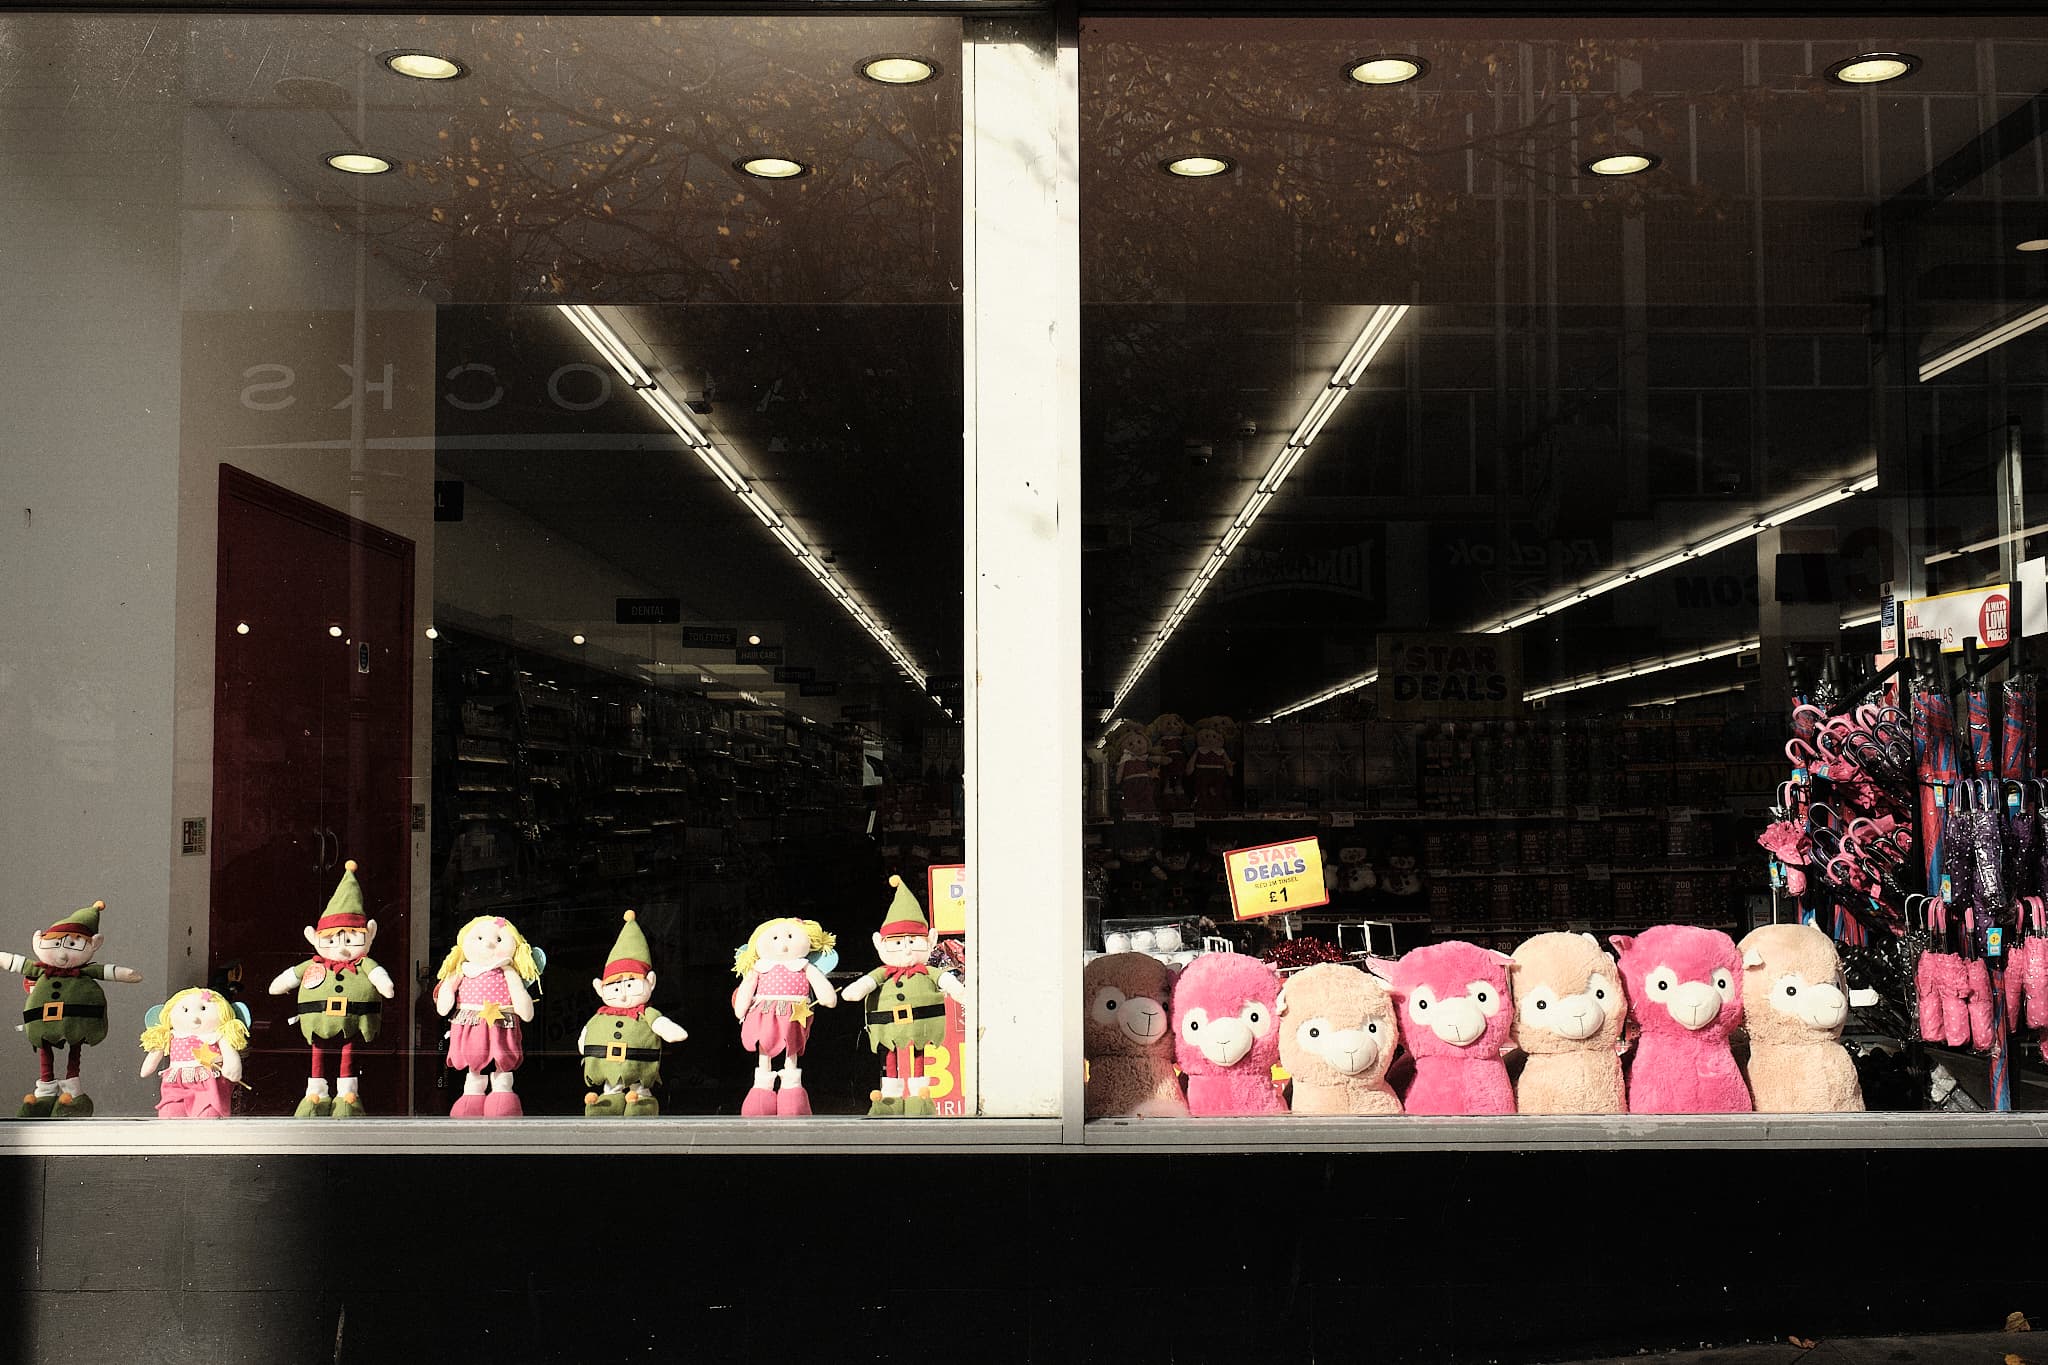 dolls and plush toys lined up in a shop window